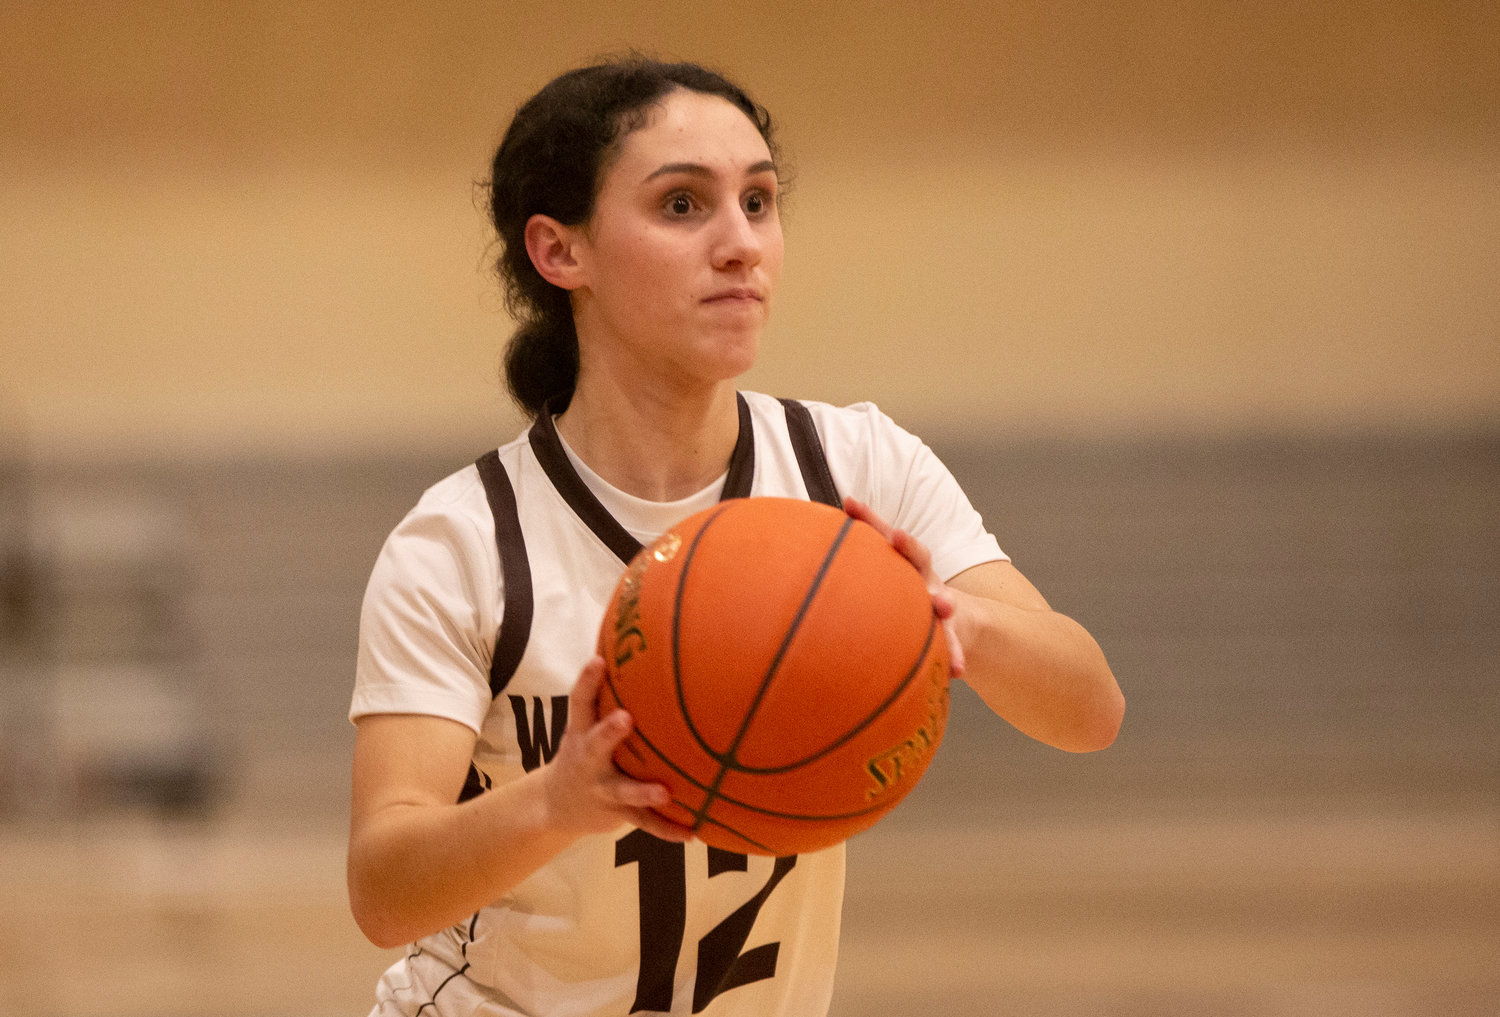 Tess Silvia scored 8 points during the Wildcats game against Holbrook on Wednesday.